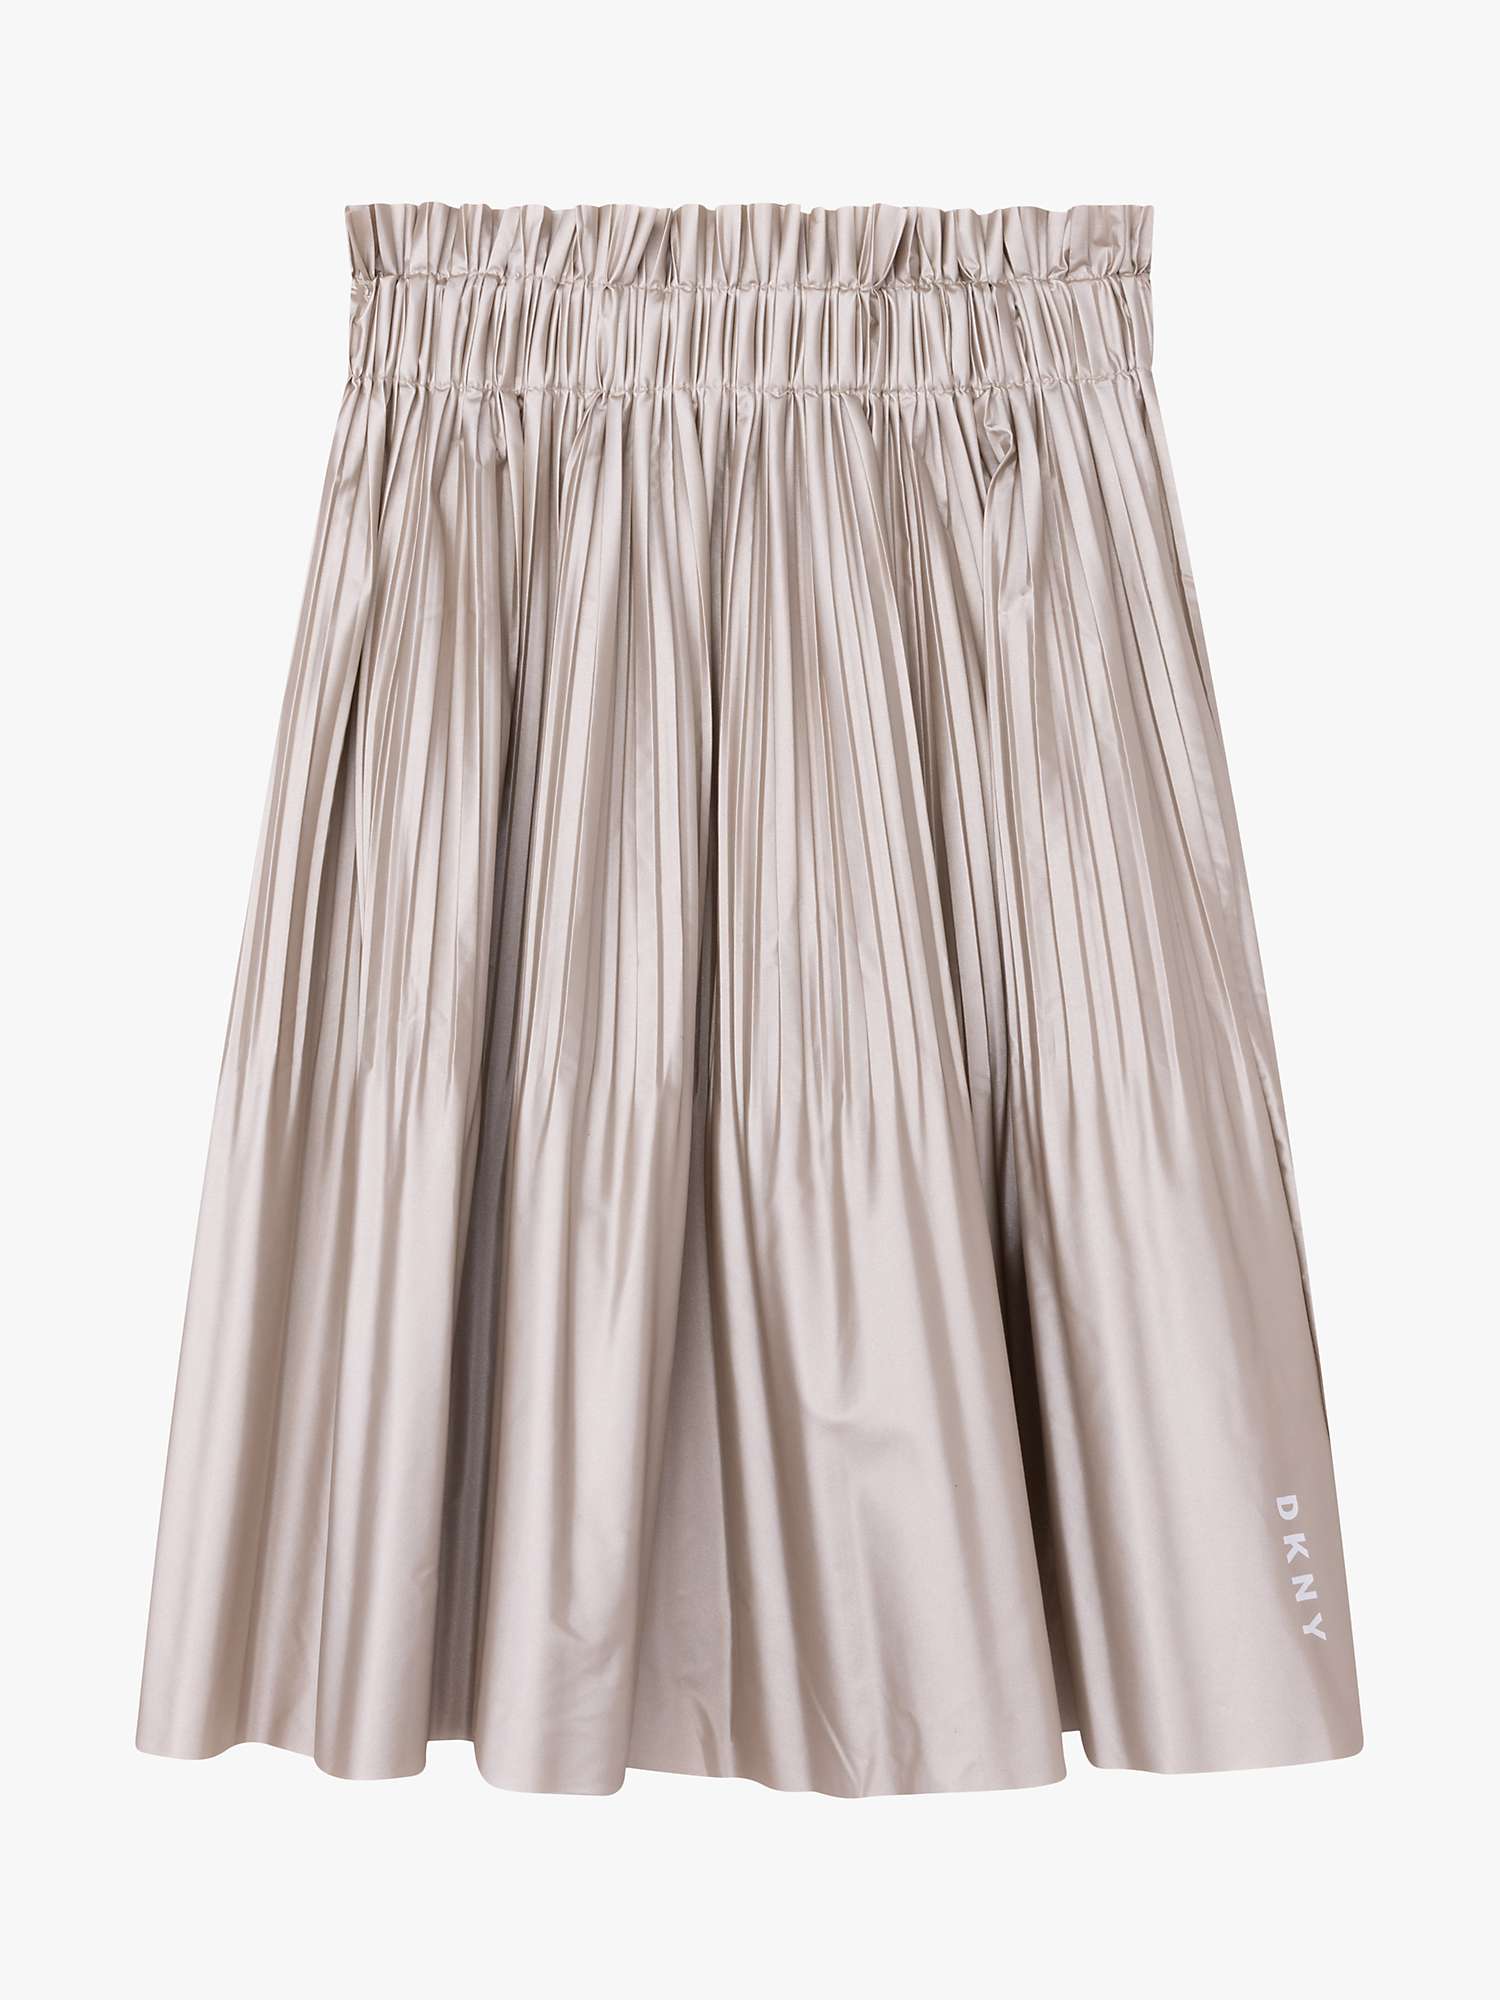 DKNY Kids' Pleated Skirt, Gold at John Lewis  Partners